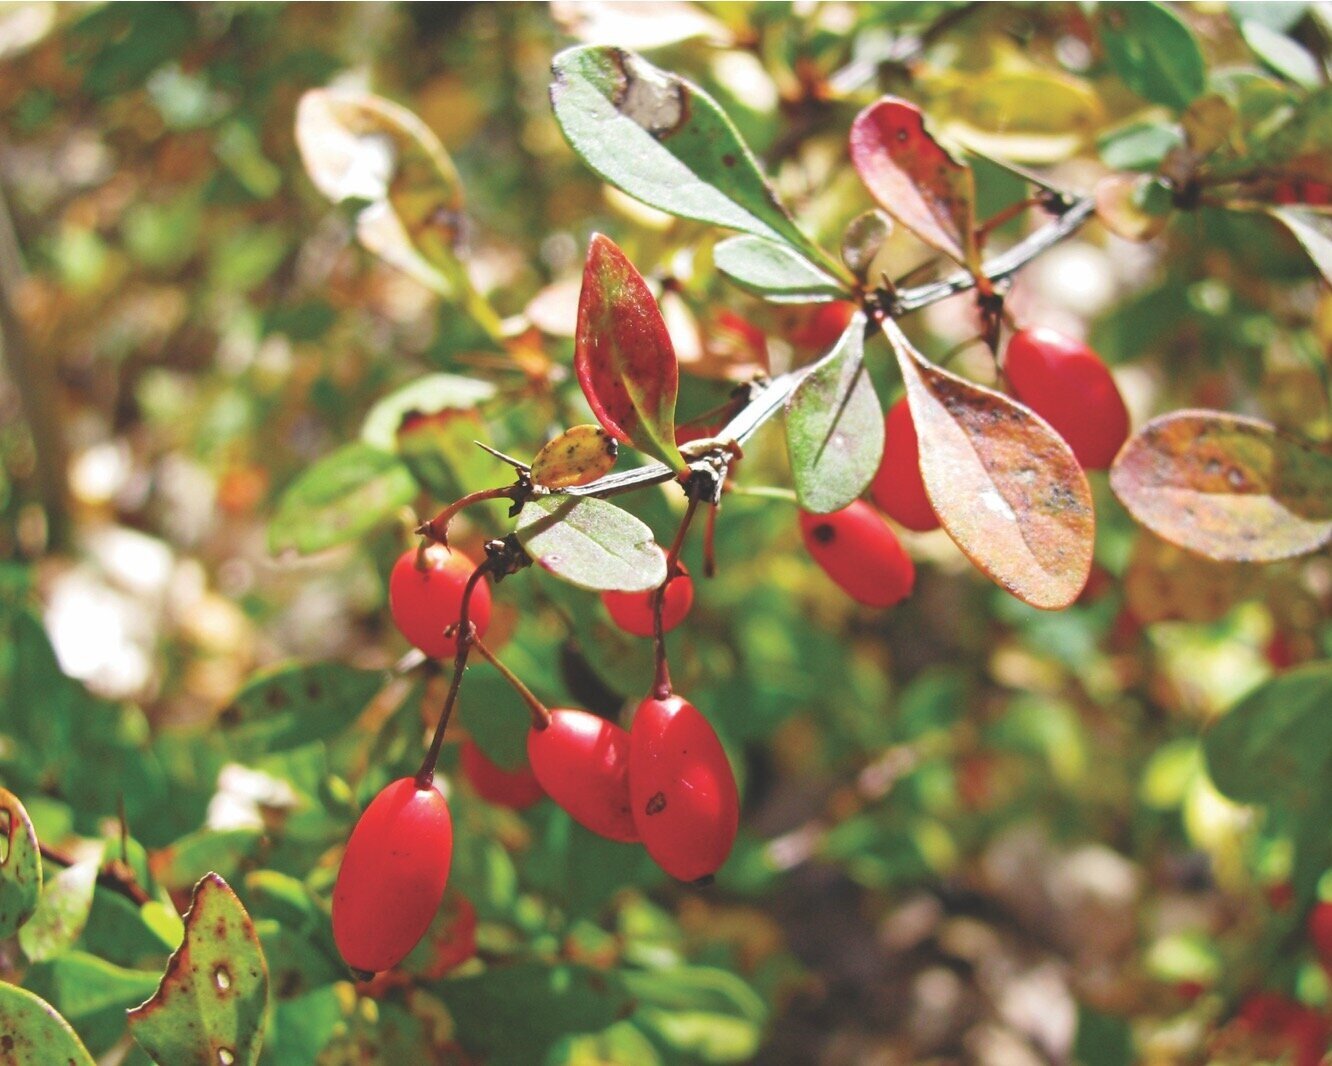 Japanese barberry foliage and fruits